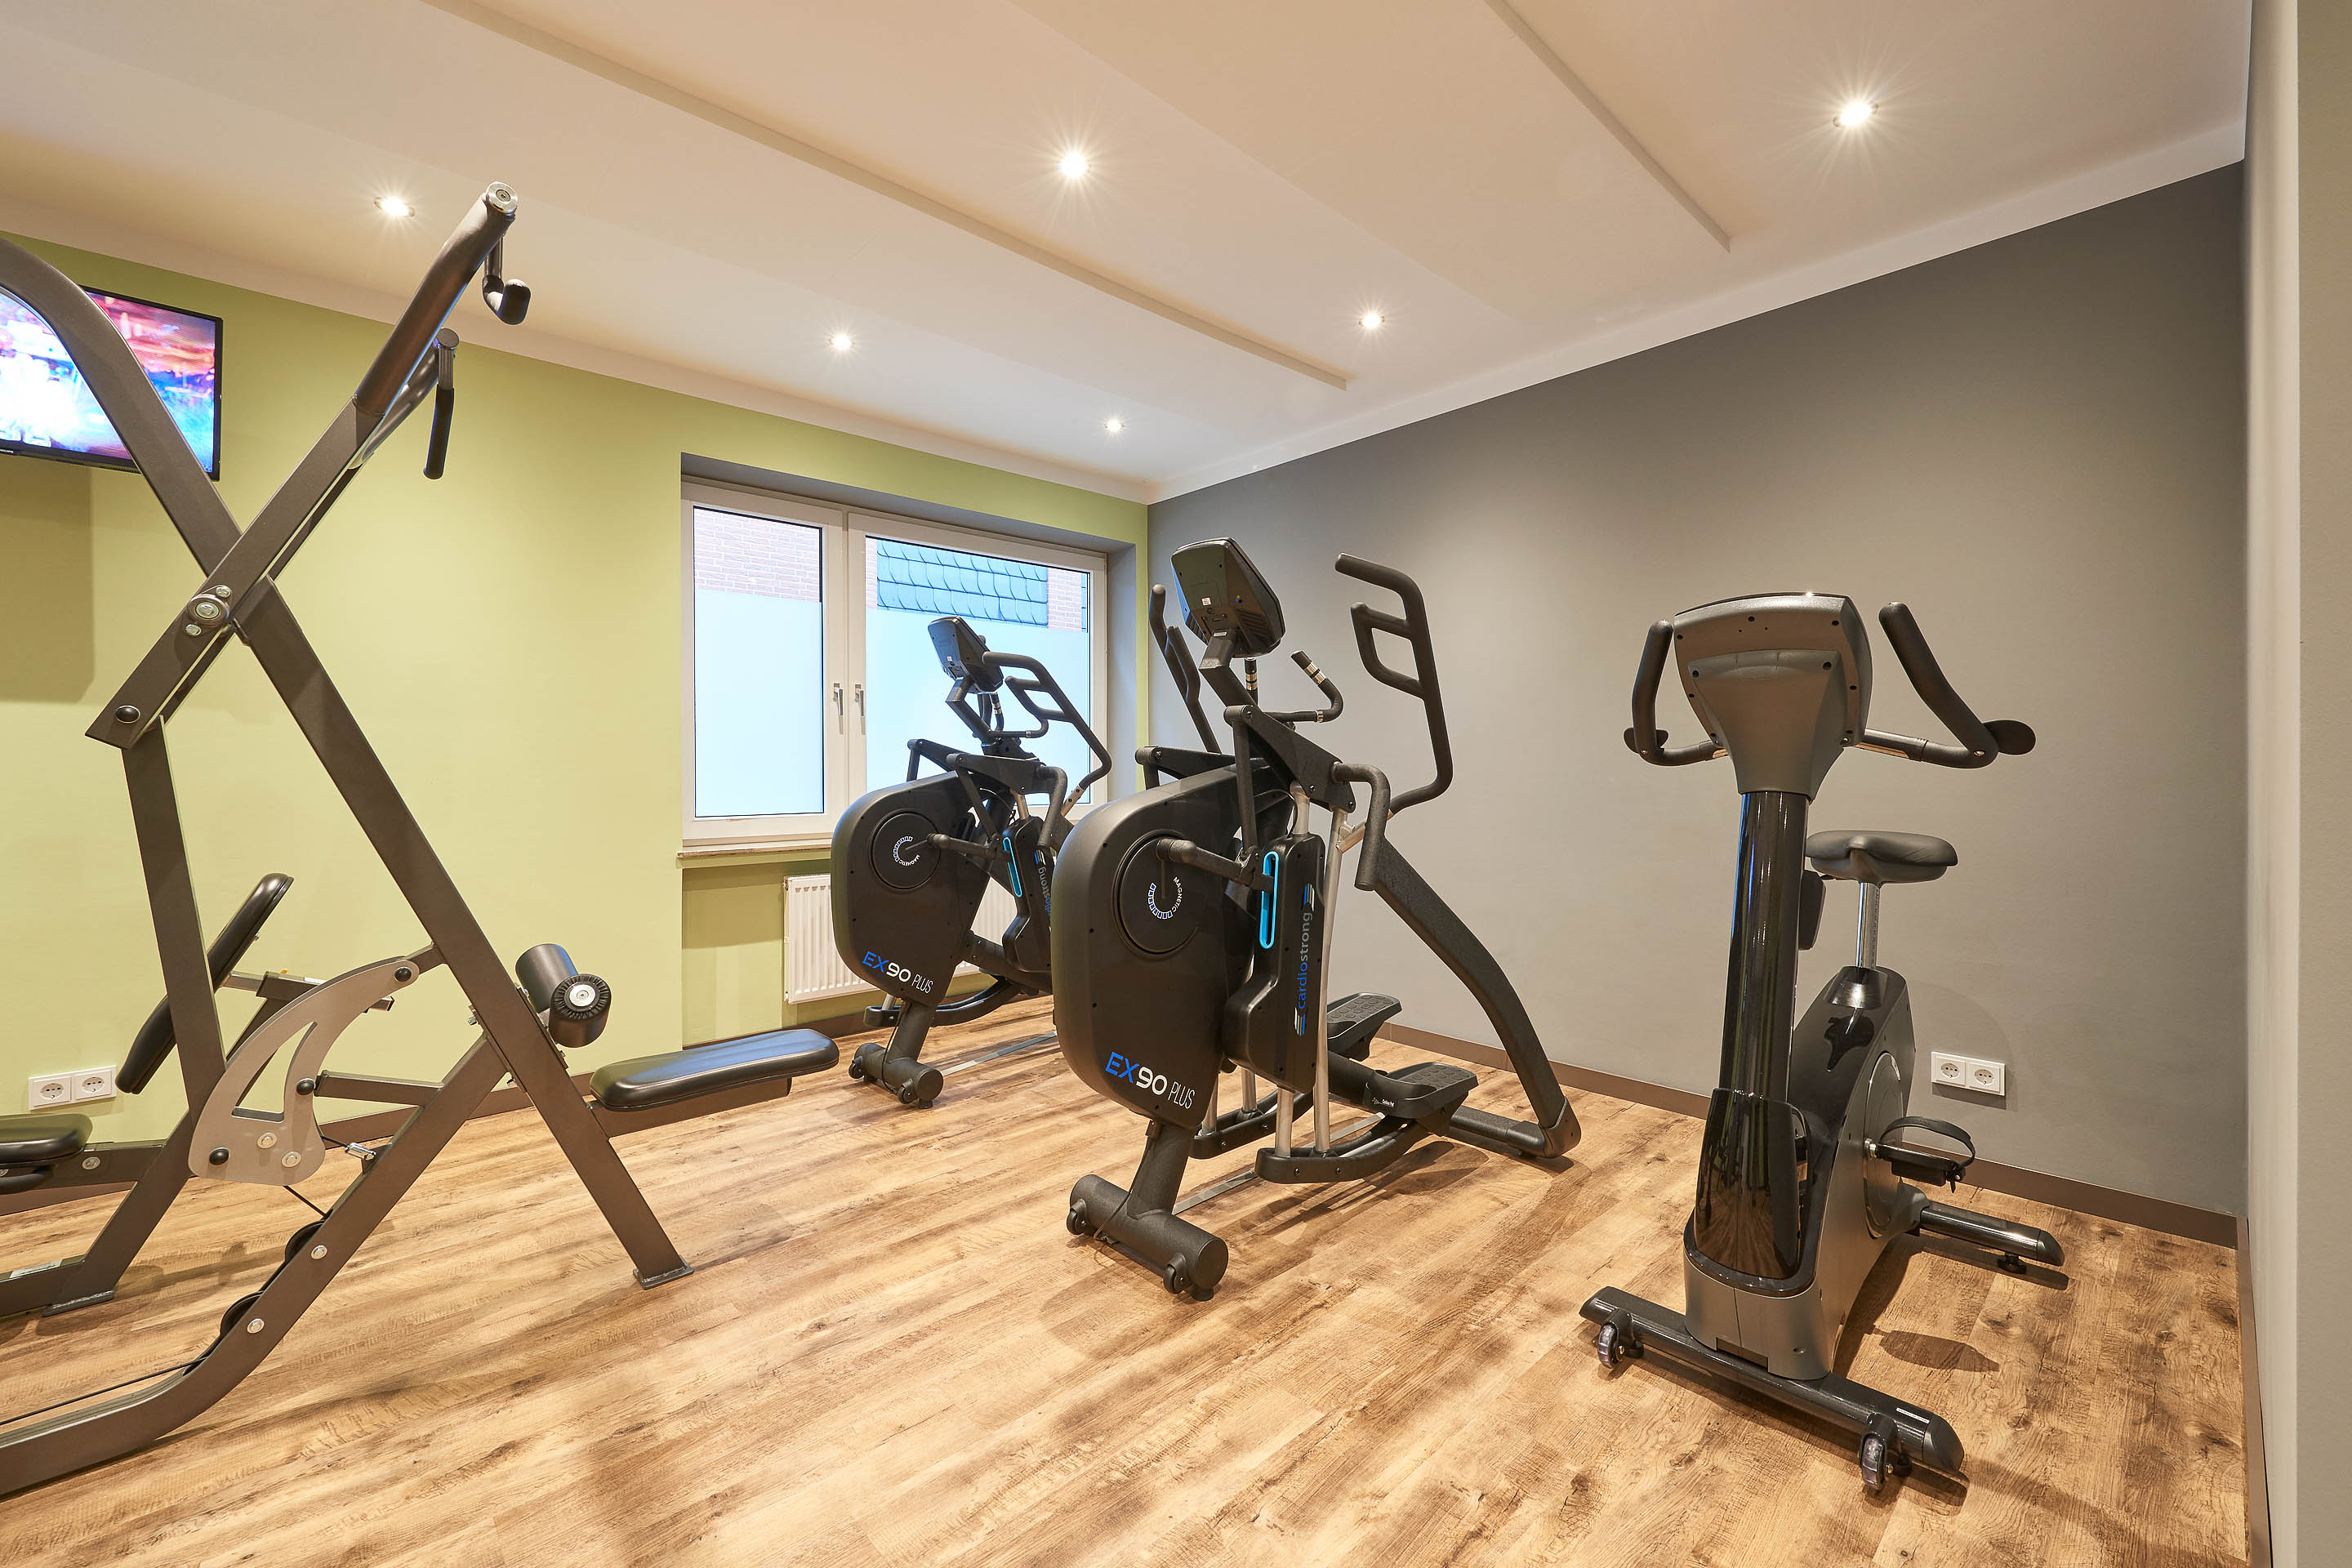 Cardio equipment in the fitness room of the Hotel Munte am Stadtwald